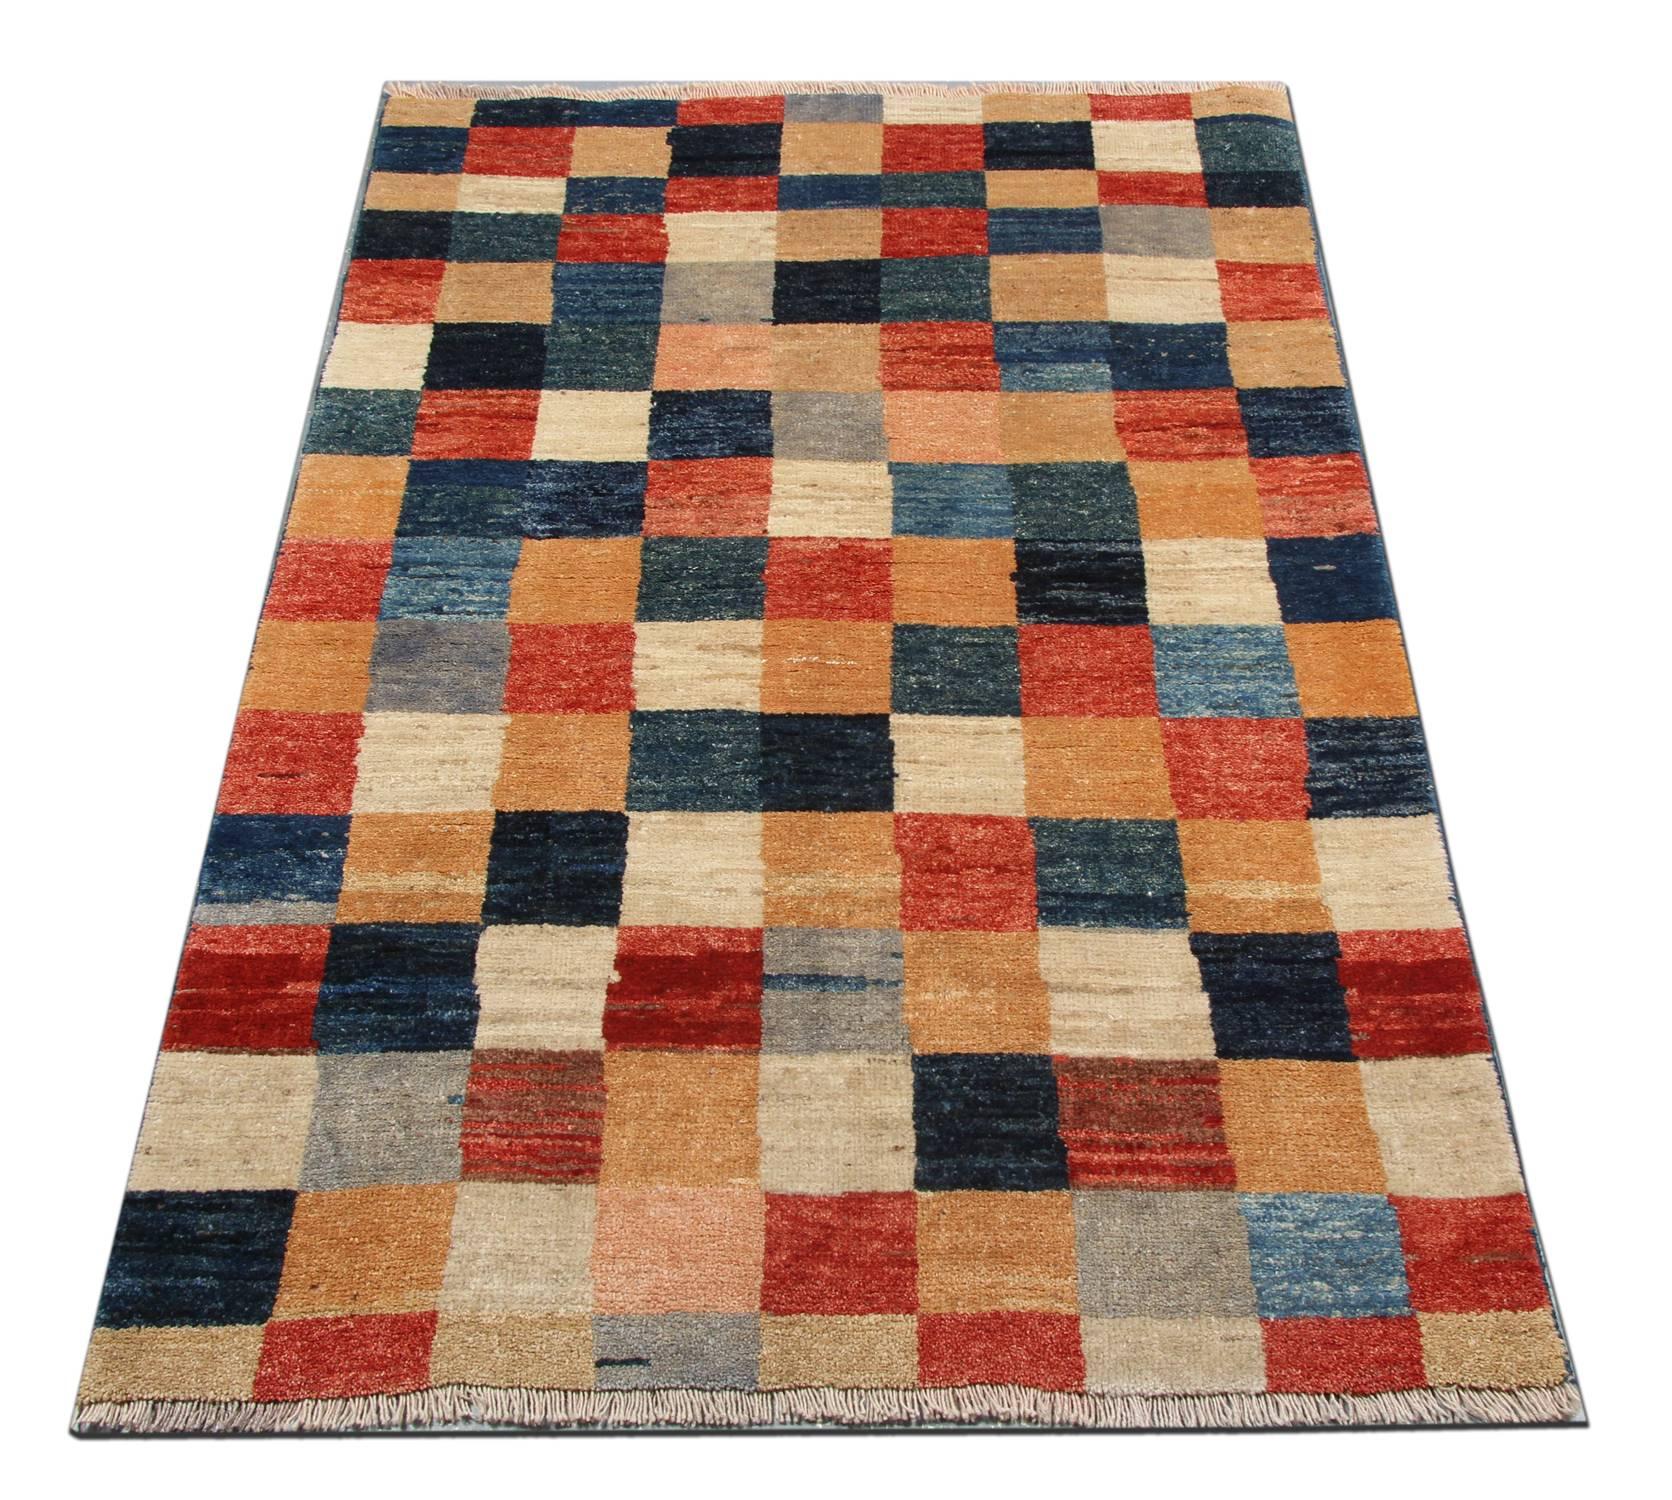 Handmade carpet wool rugs have rich colors and abstract elements and these modern rugs give a subtle contemporary appearance. This geometric Oriental rug is featuring a beautiful plaid palette of blue, gold, navy, rust, ivory and grey rug colors.